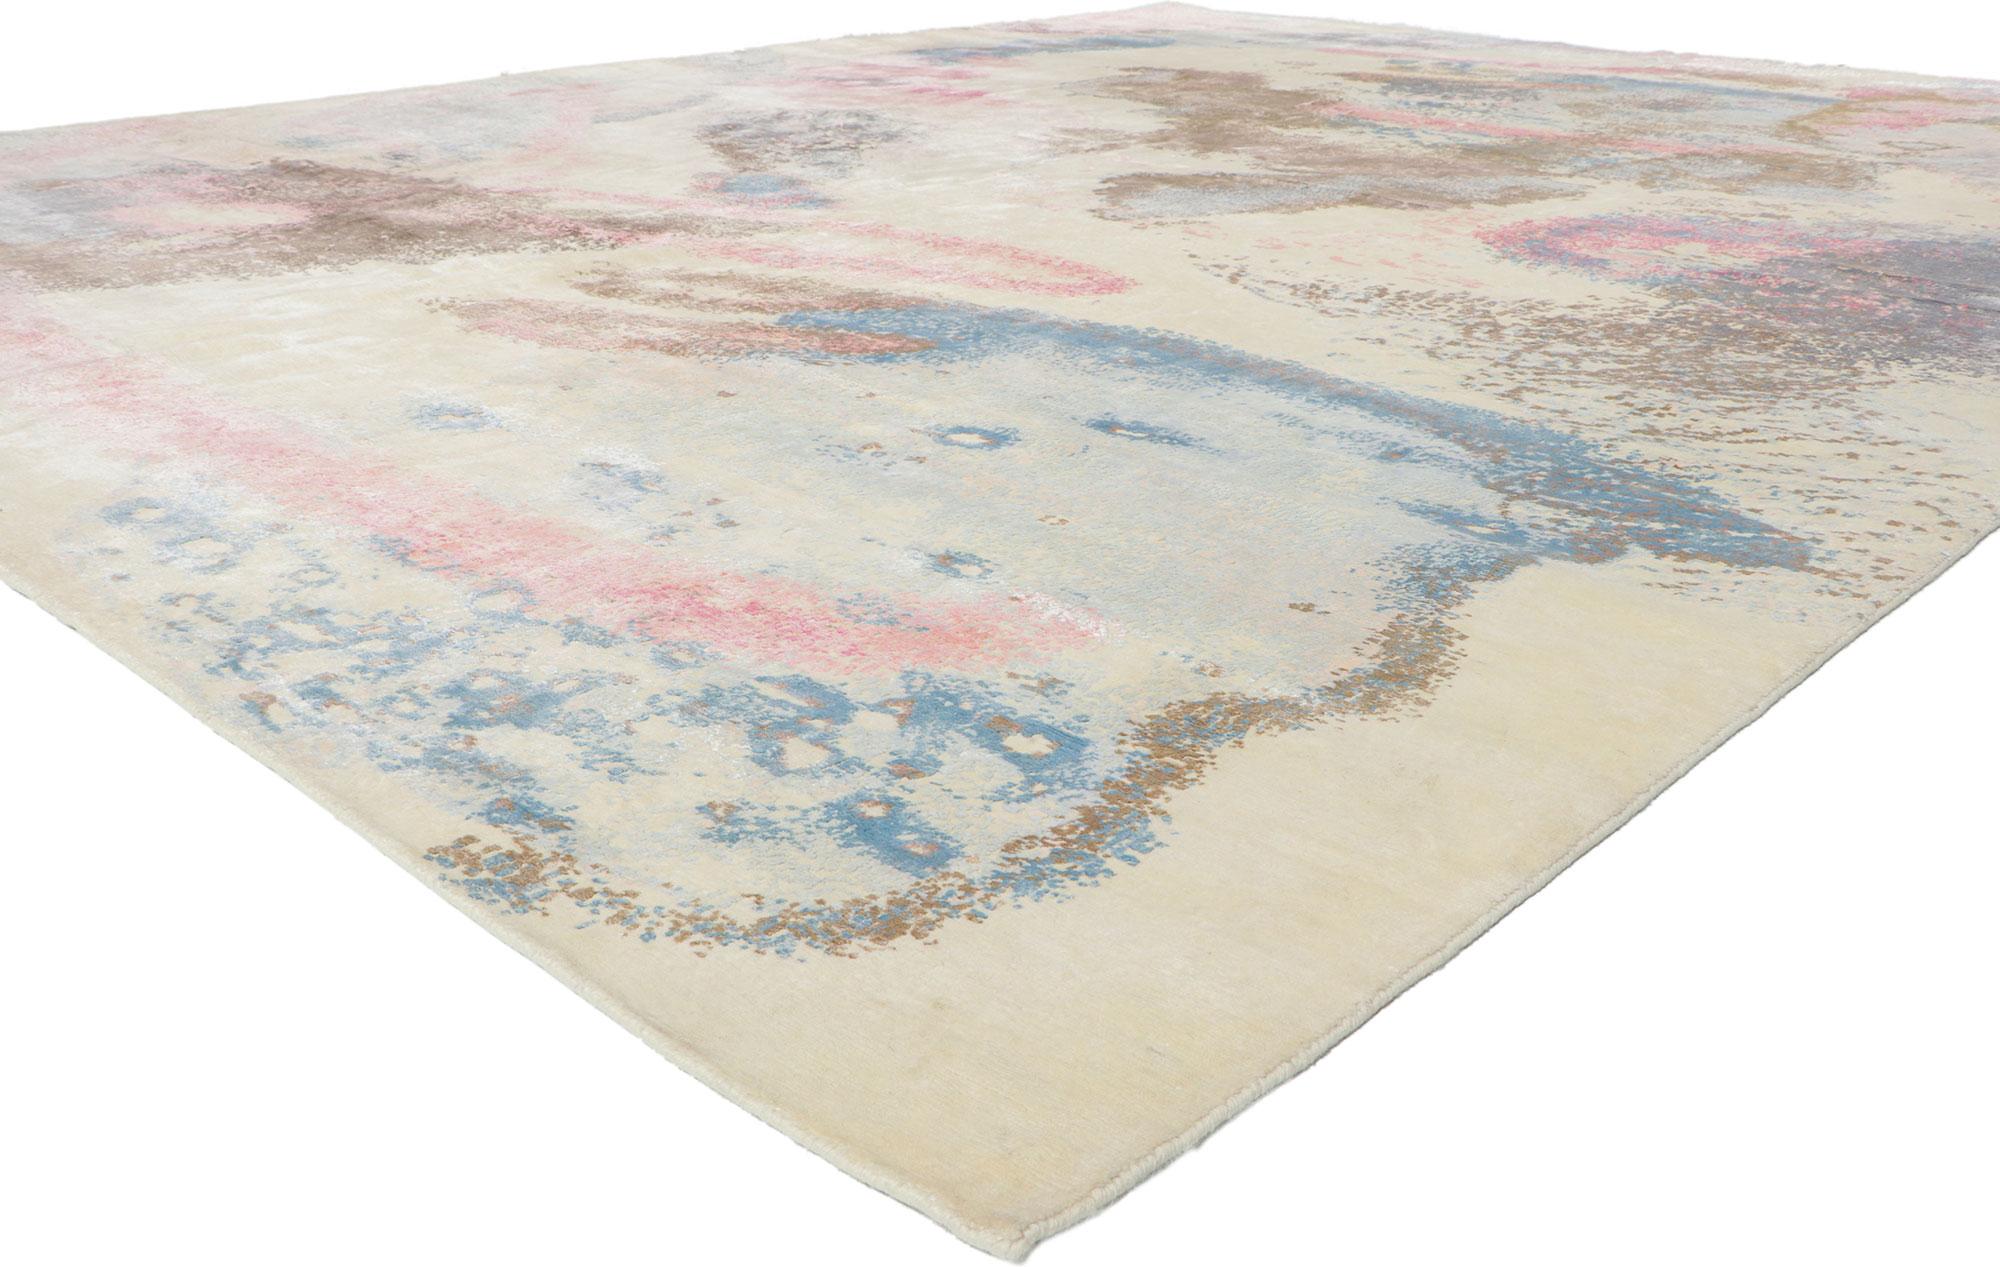 30790 new contemporary abstract rug inspired by Helen Frankenthaler, 11'07 x 14'08. Showcasing a modern style and raised silk design with incredible detail and texture, this hand knotted contemporary textured rug is a captivating vision of woven